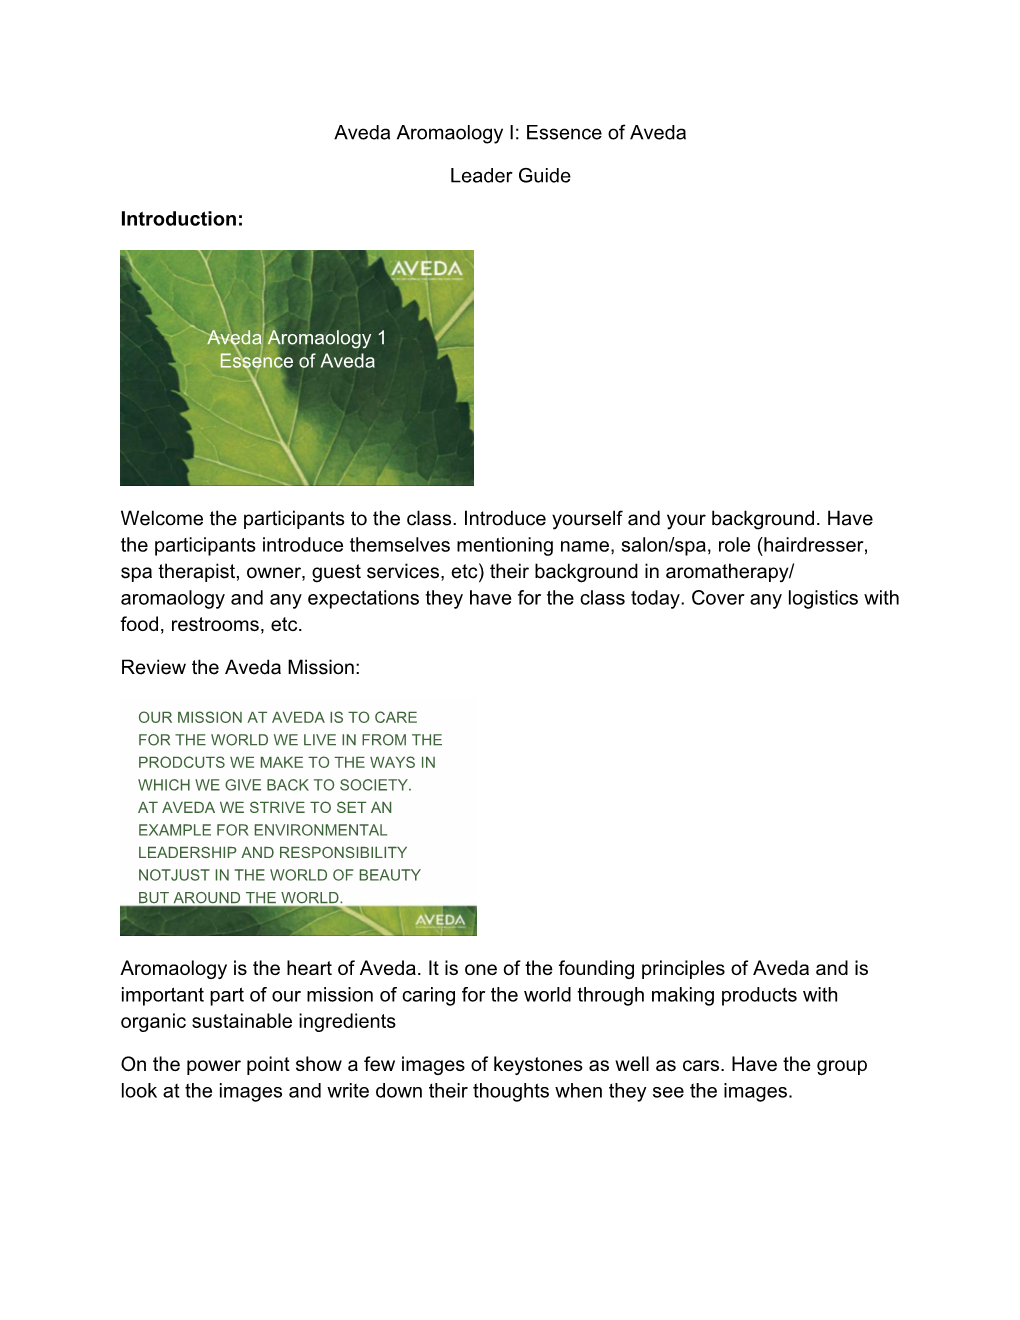 Aveda Aromaology I: Essence of Aveda Leader Guide Introduction